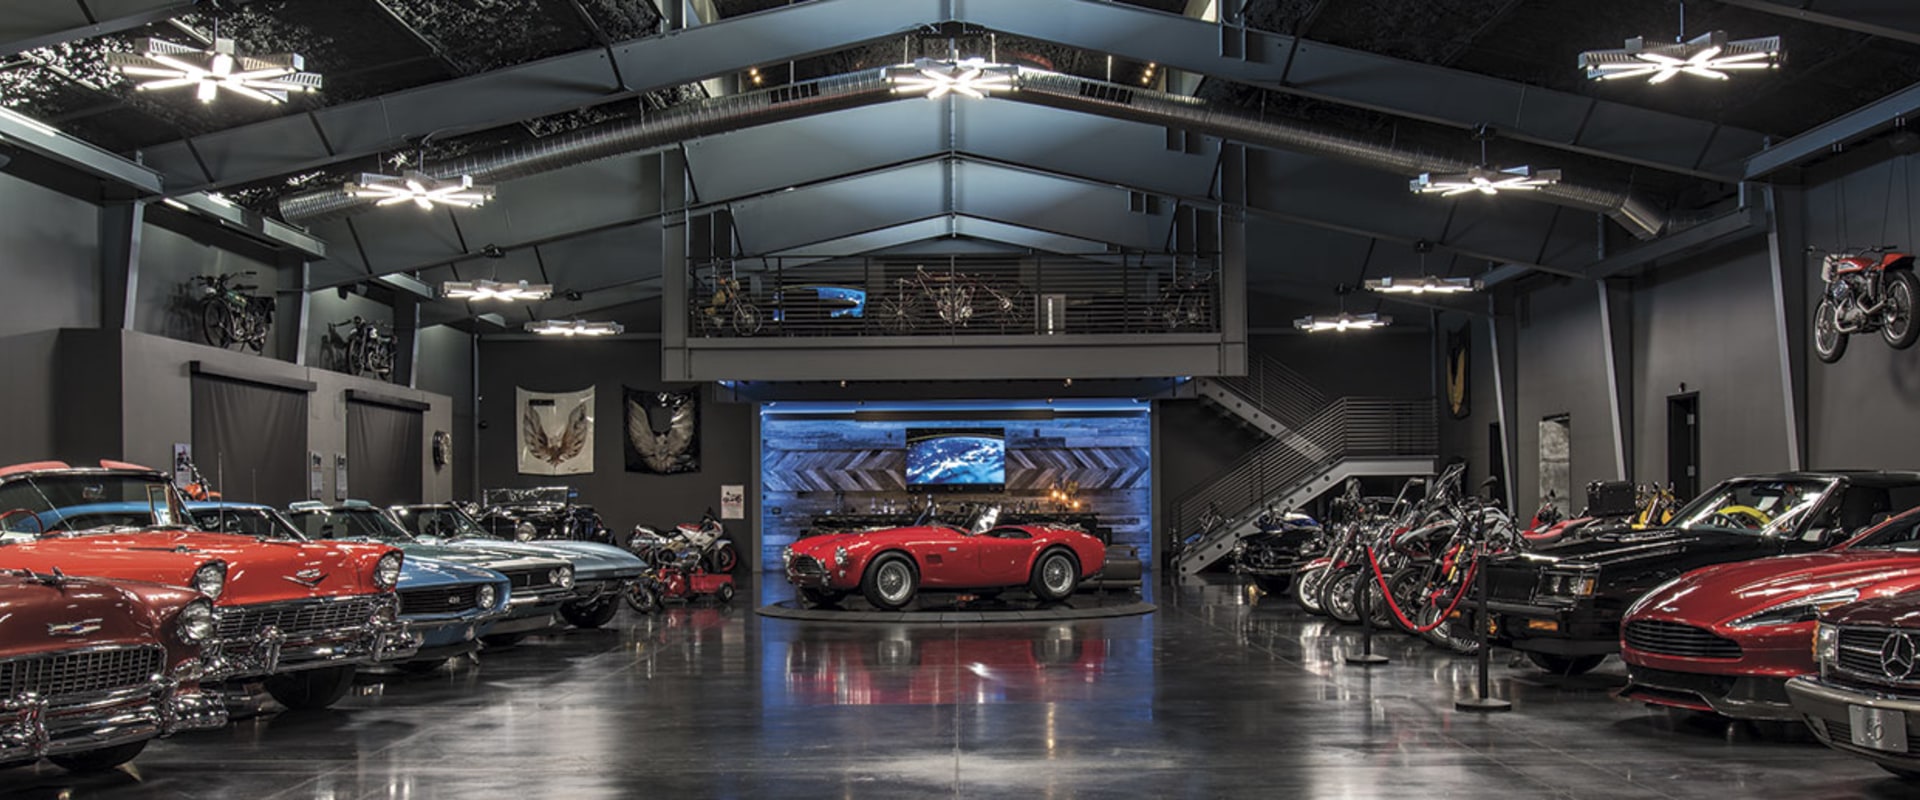 Discover the Most Unique Car Collections in Scottsdale